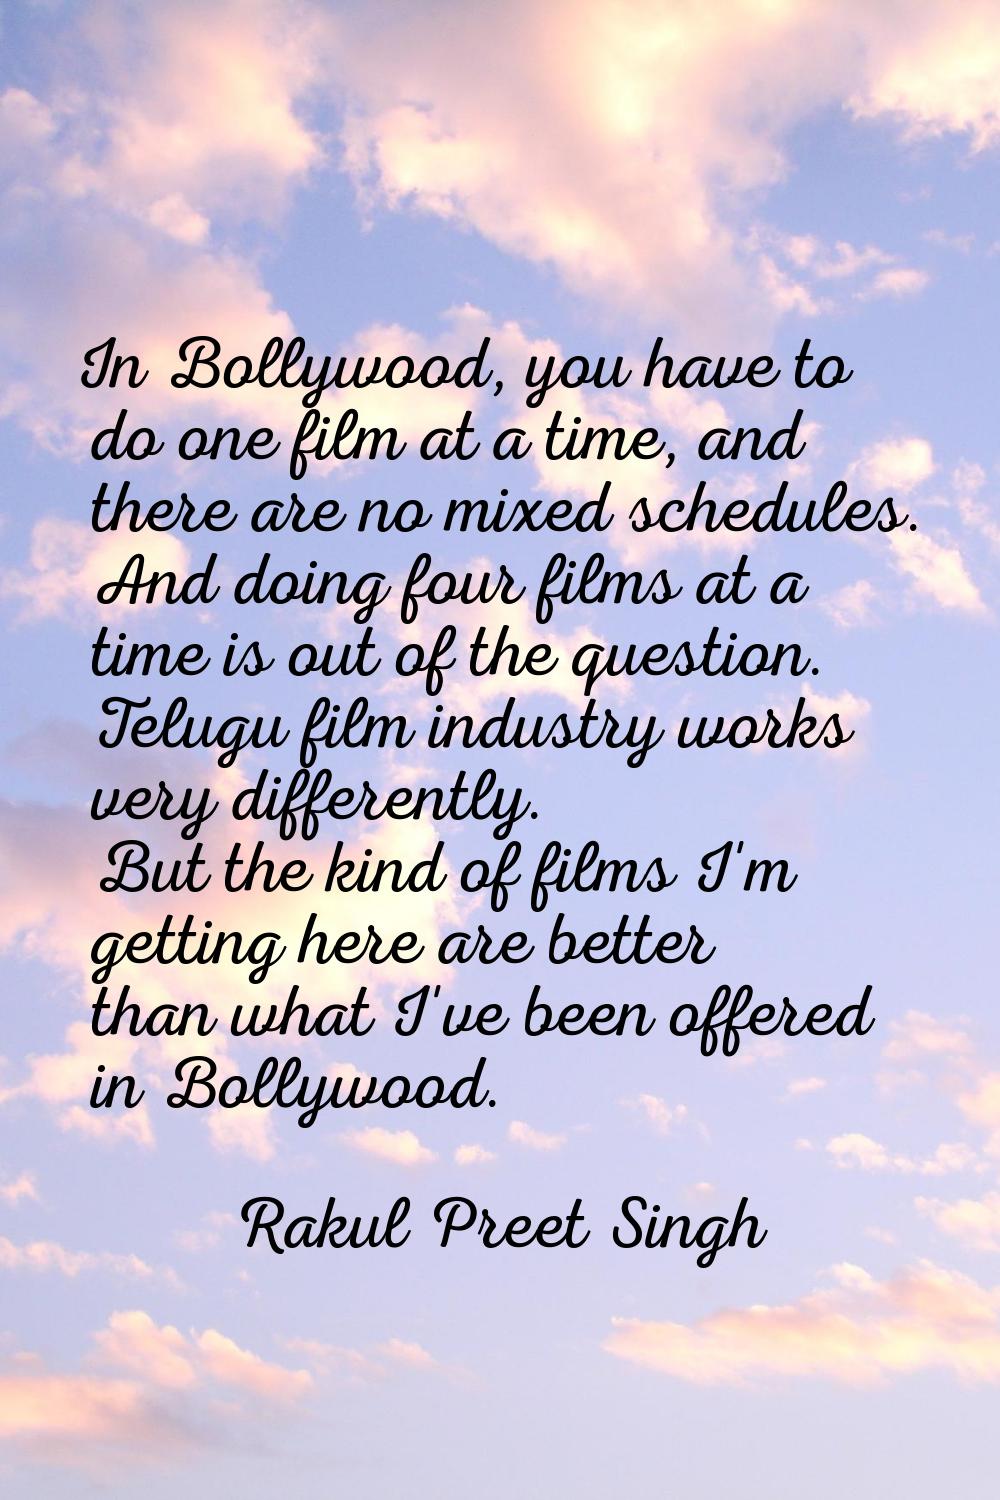 In Bollywood, you have to do one film at a time, and there are no mixed schedules. And doing four f